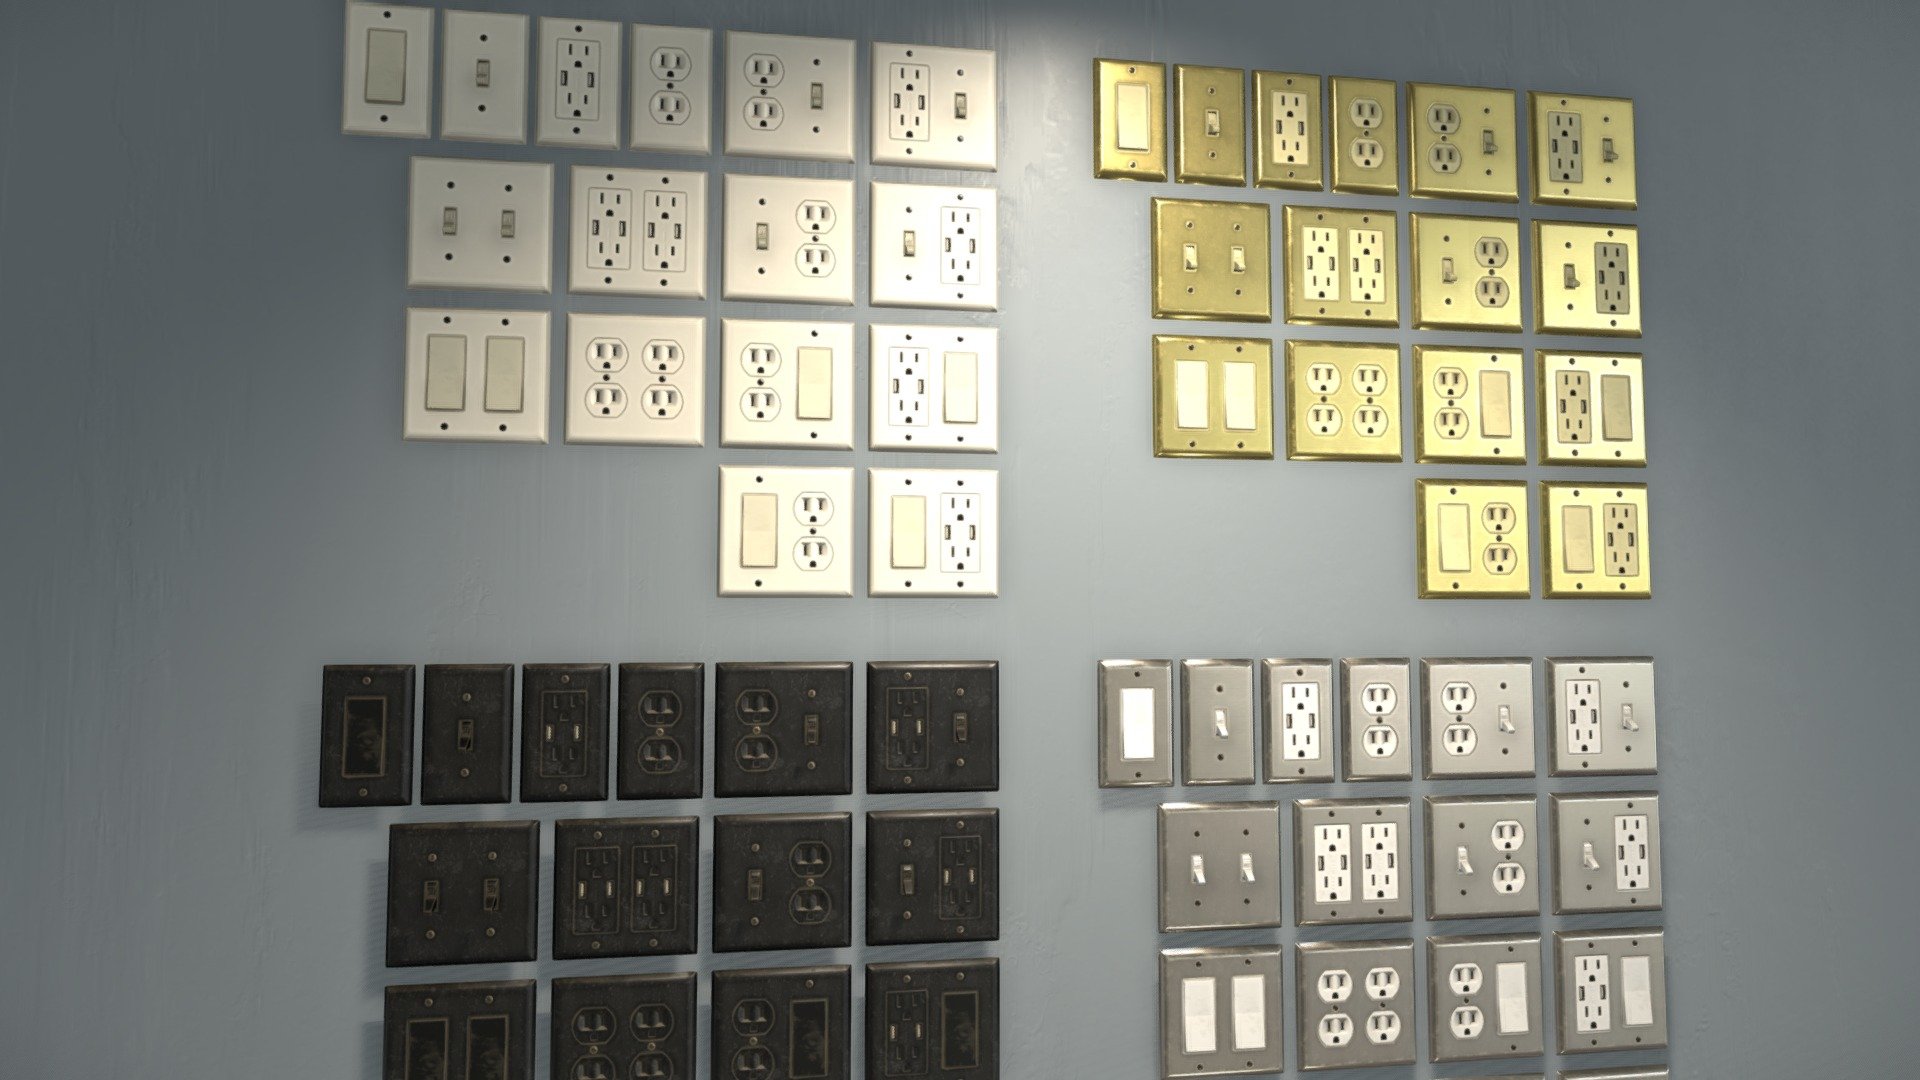 Assorted electircal outlets and switches. Low poly and ready to use for any archvis or realtime applications.

Contents:

2 switch and outlet varients, as well as double versions.

Light switches are animated and can go up and down.  

5 differnt 1k pbr material sets (white, gold, nickel, black, and yellow) with ARM texture (R - AO, G - Metalness, B - Roughness) each set shares the same material

This asset was made in Blender, and looks best inside Blender. However it can be exported to other applications.

Comment if you have any questions 3d model